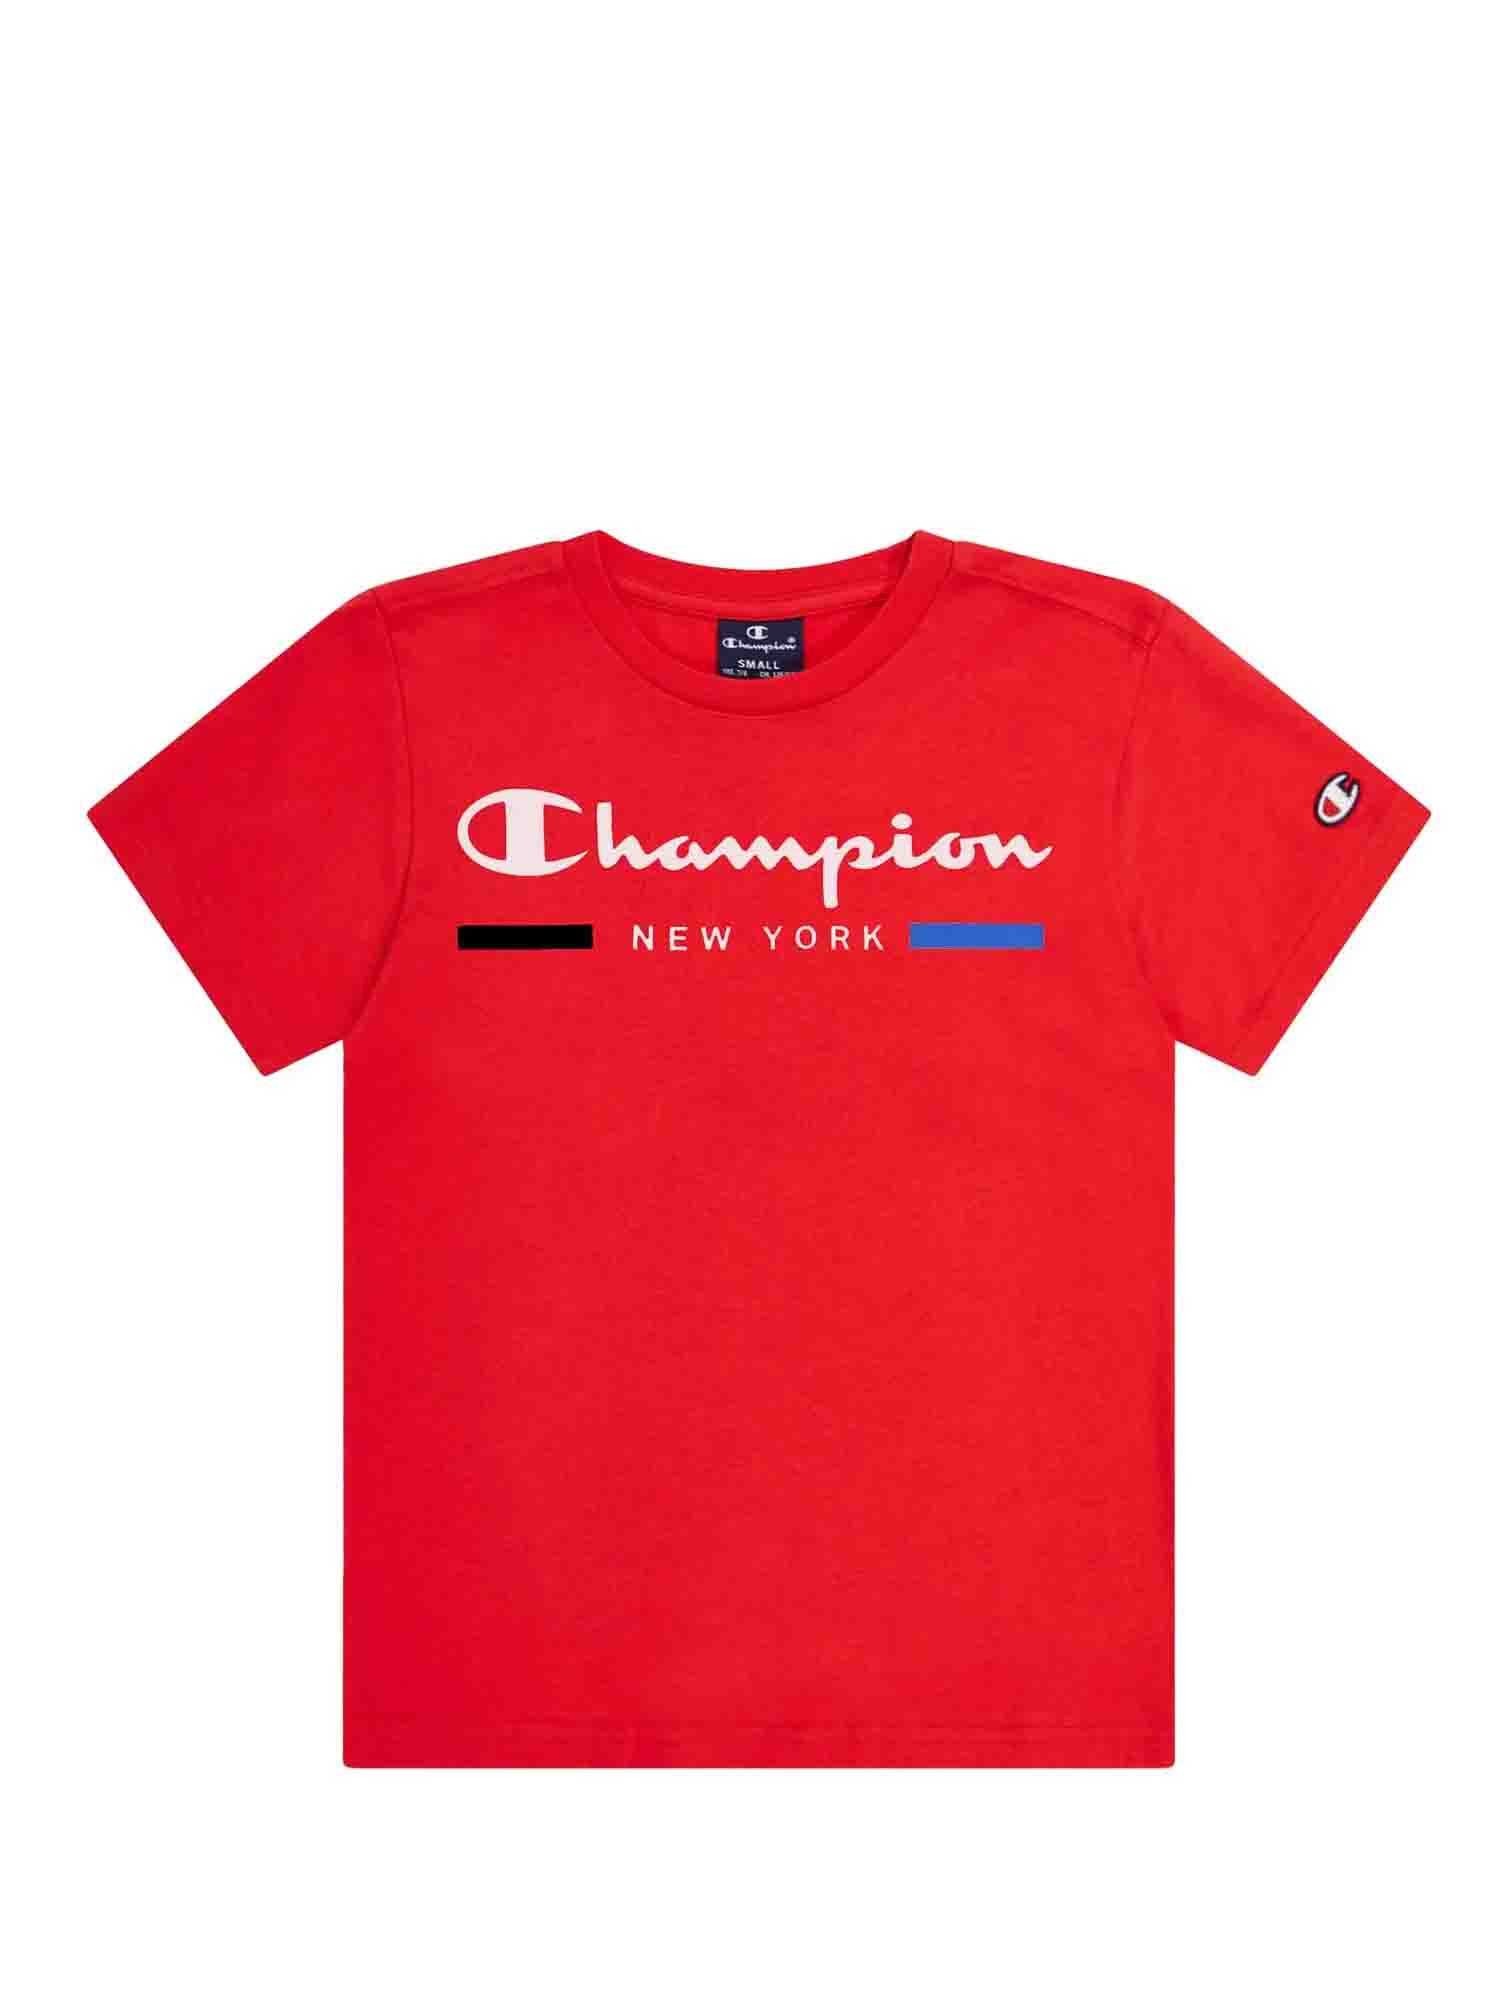 CAMPION T-SHIRT GRAPHIC NEW YORK ROSSO